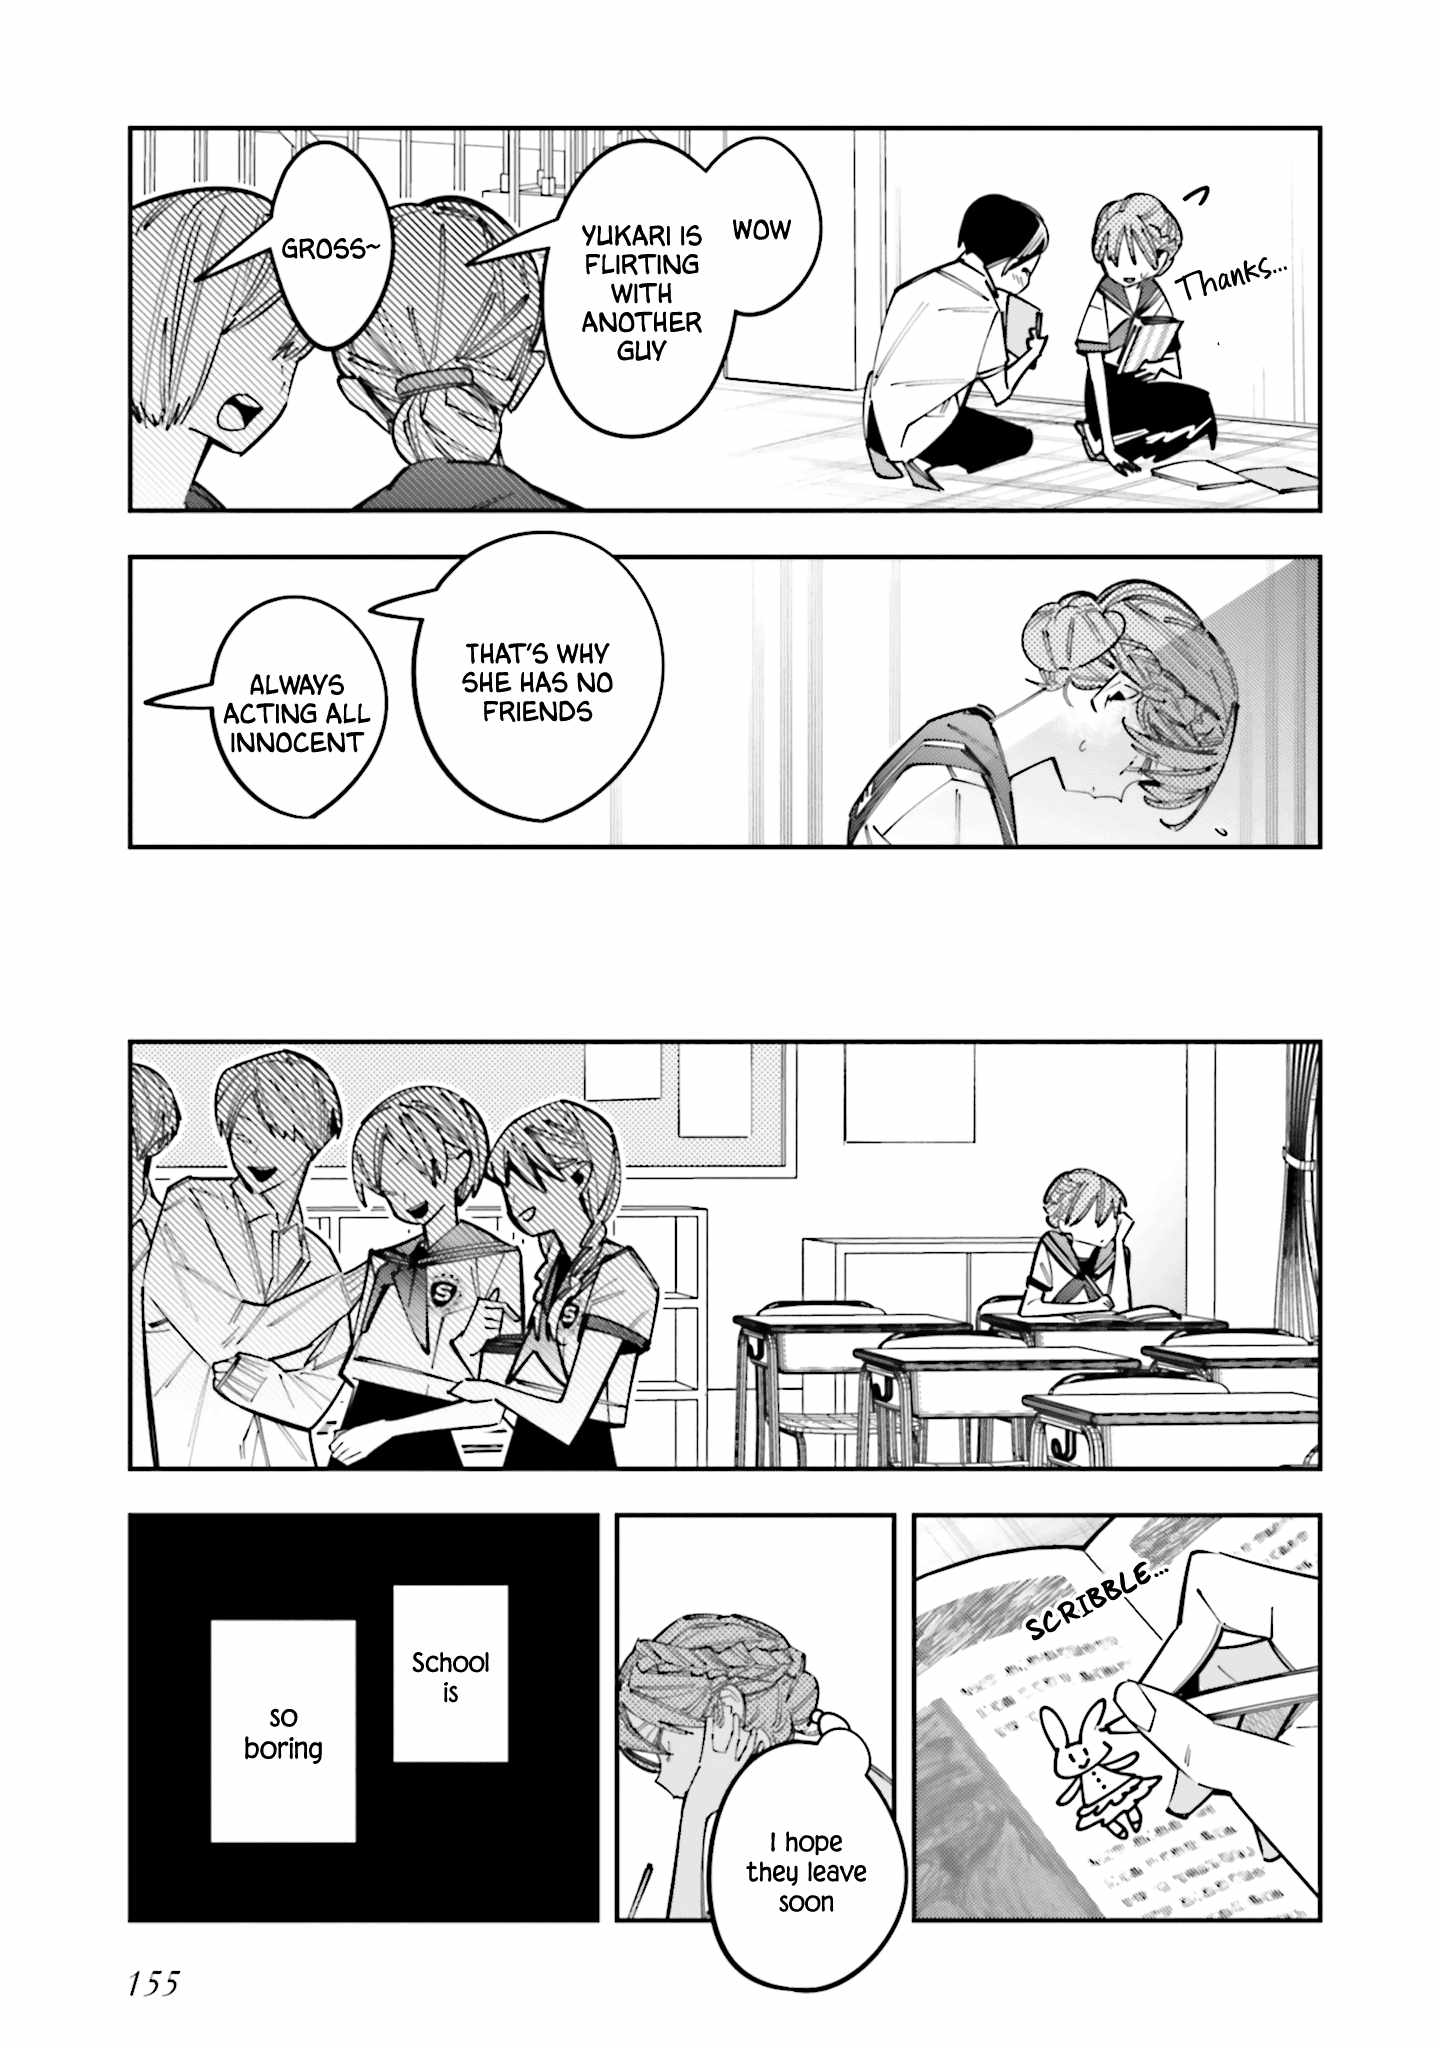 I Reincarnated as the Little Sister of a Death Game Manga's Murd3r Mastermind and Failed Chapter 13-5-eng-li - Page 16